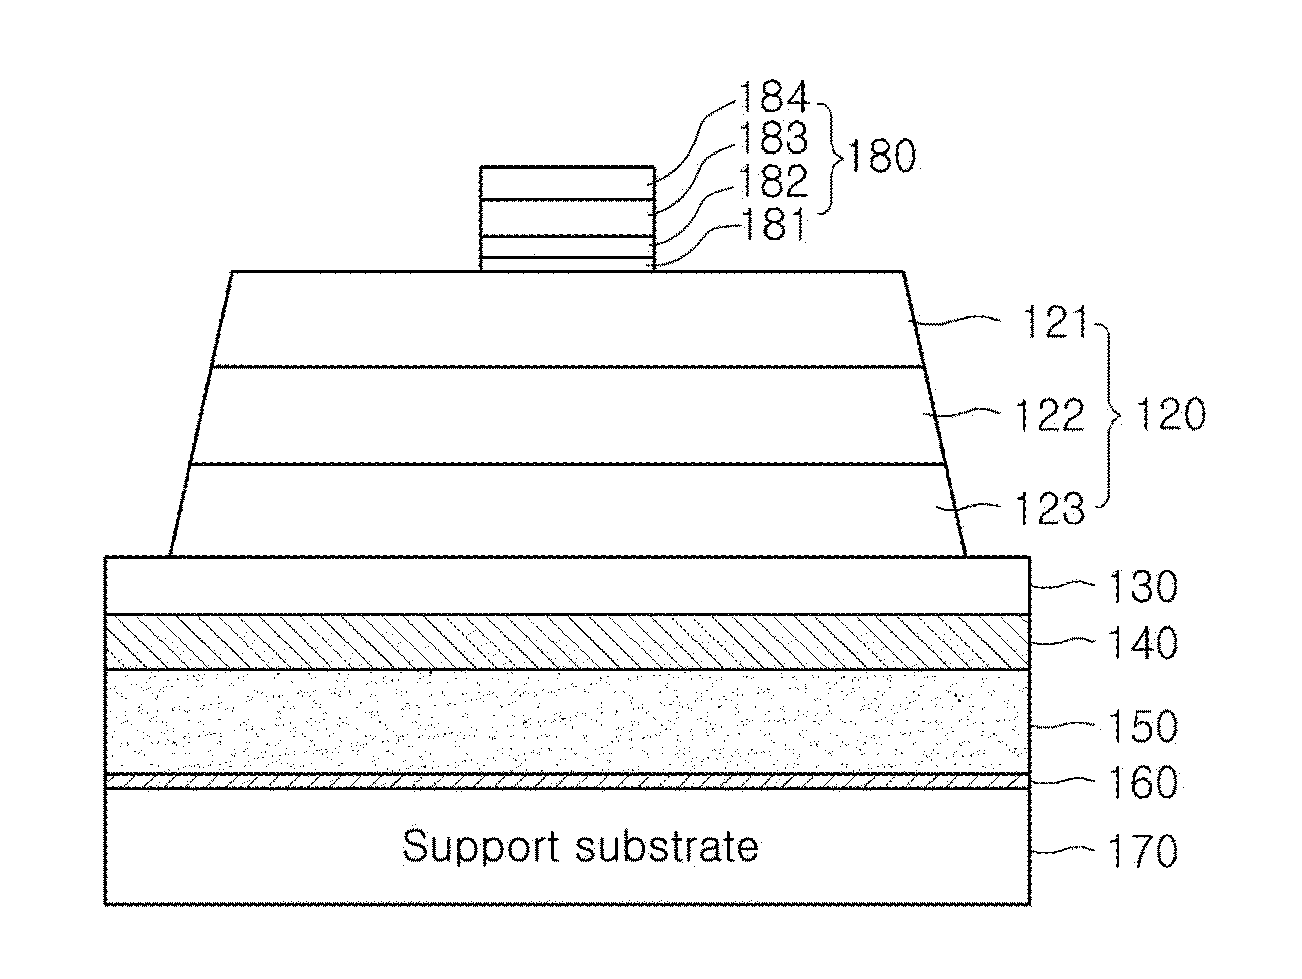 Semiconductor light emitting diode having ohmic electrode structure and method of manufacturing the same